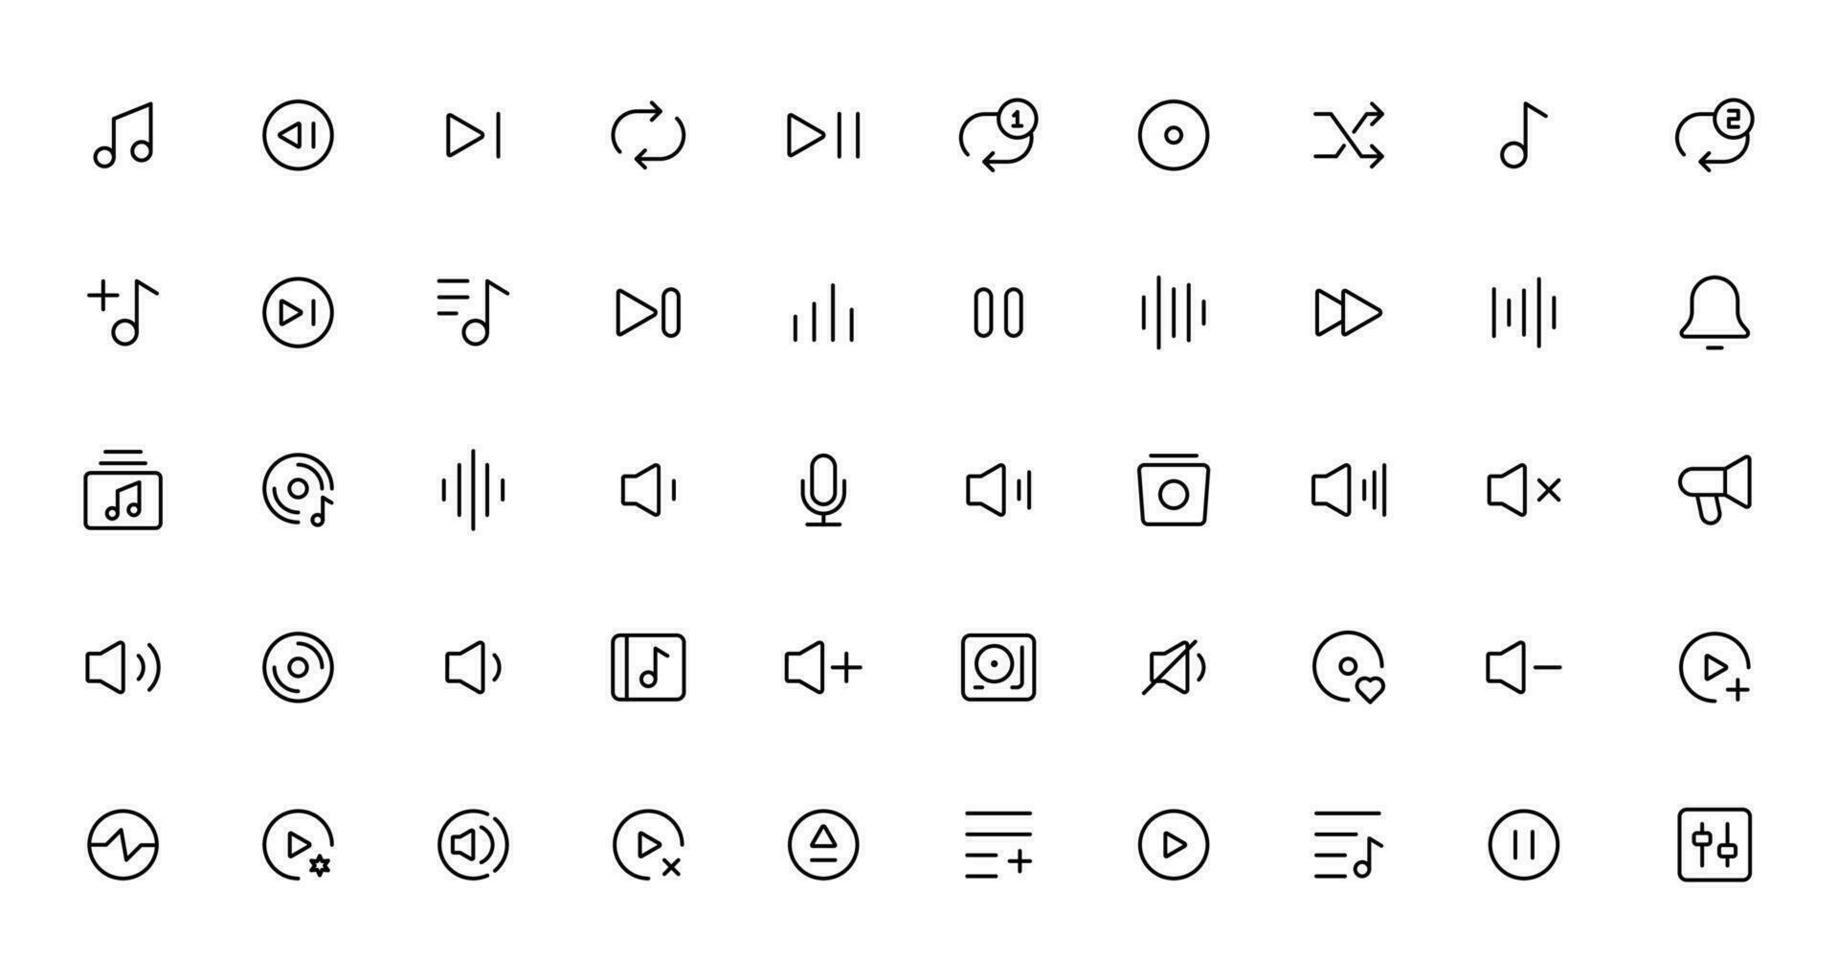 Music notes icon set, Music notes symbol,Music and sound icon set. vector